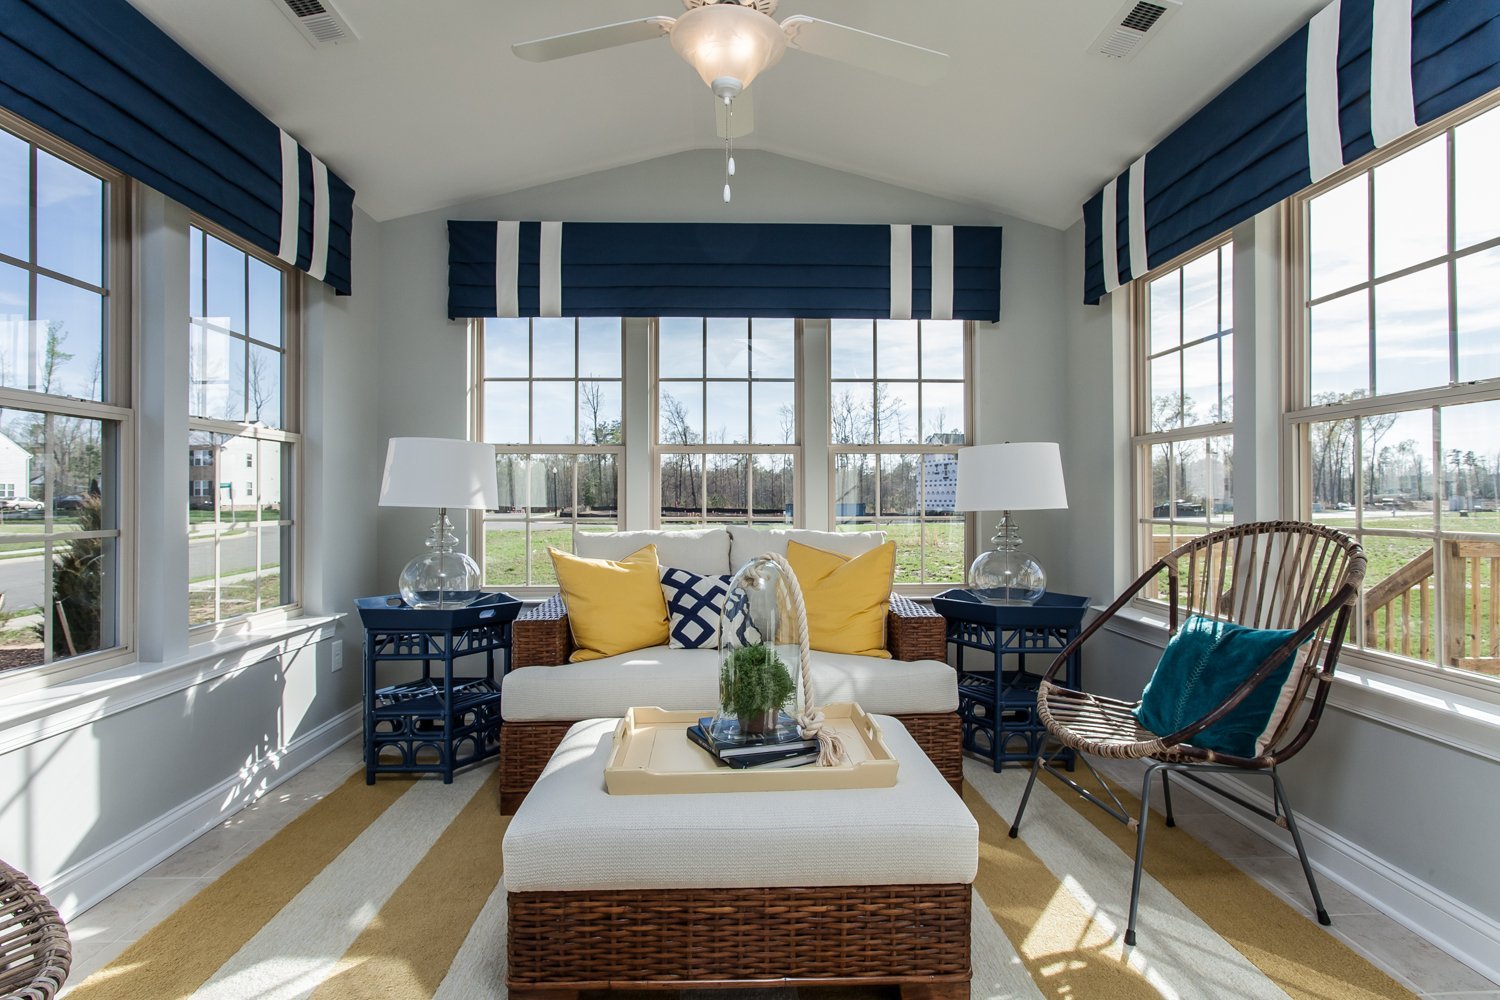 Turn Your Dream of a Sunroom Into Your Reality